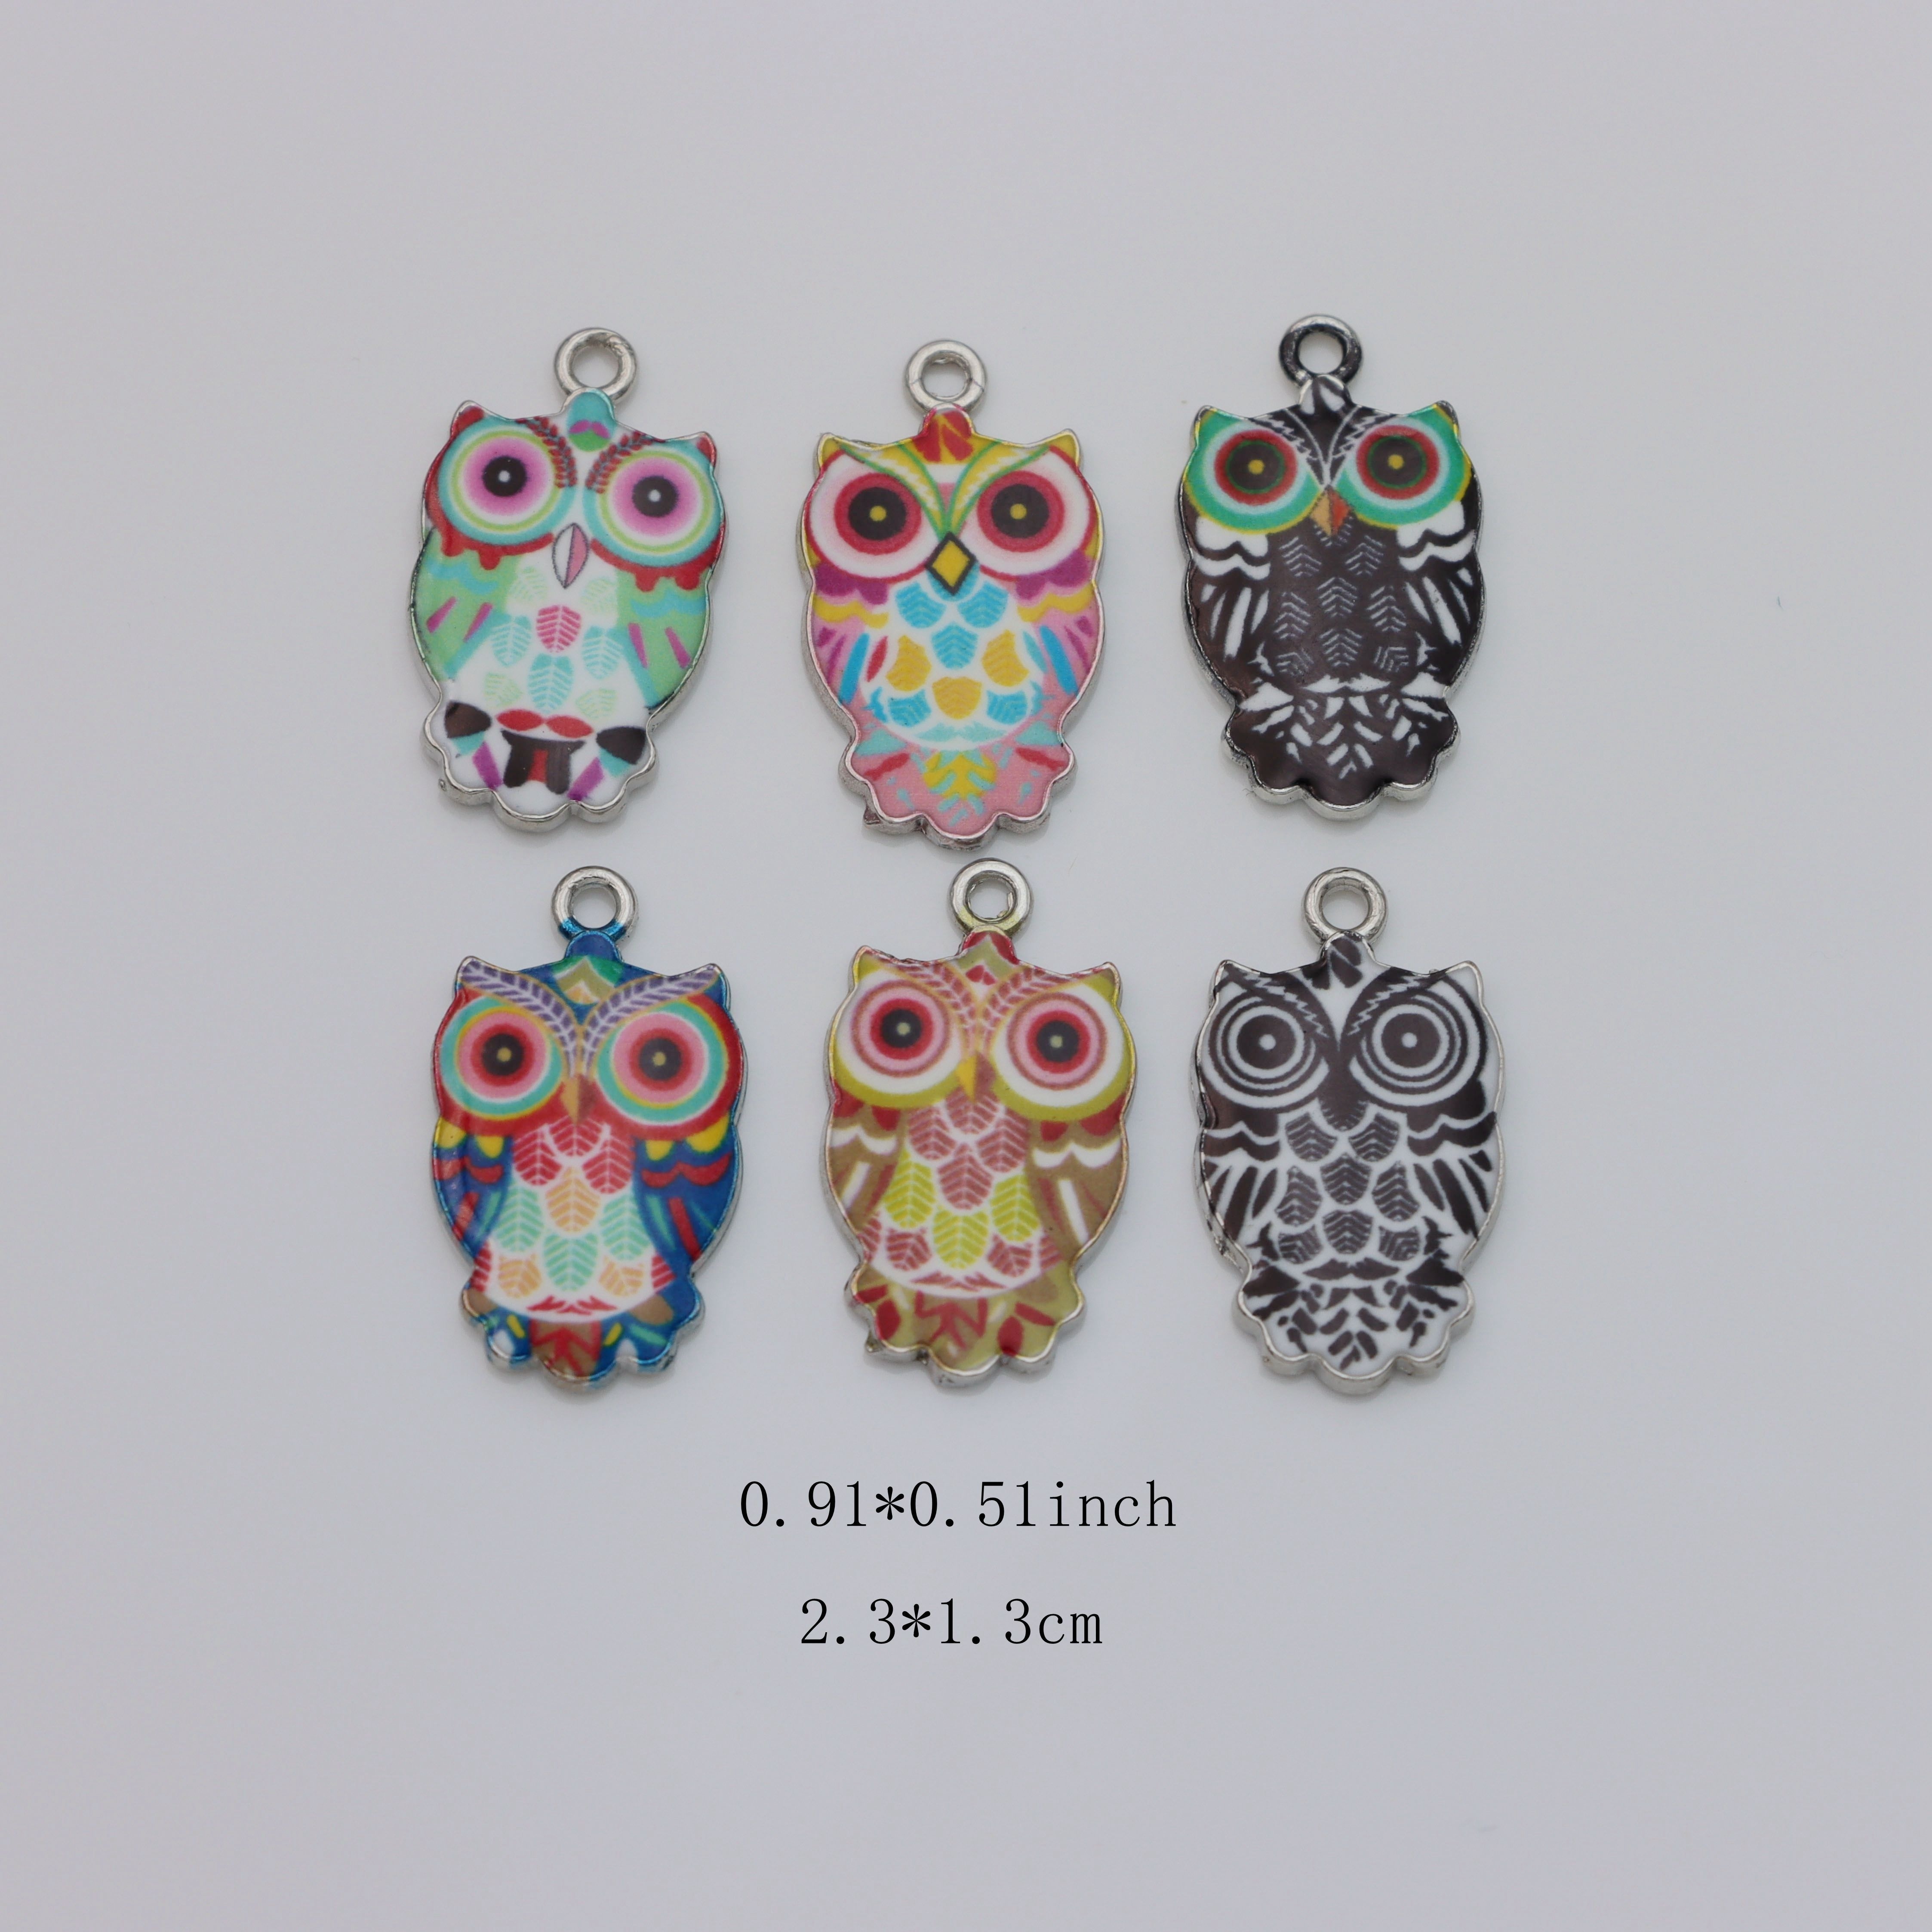 30 Pieces Owl Enamel Charms For Jewelry Making Colorful Owl Charms Metal  Owl Charms Pendants Cute Animal Enamel Charms For Diy Necklace Earring  Bracel